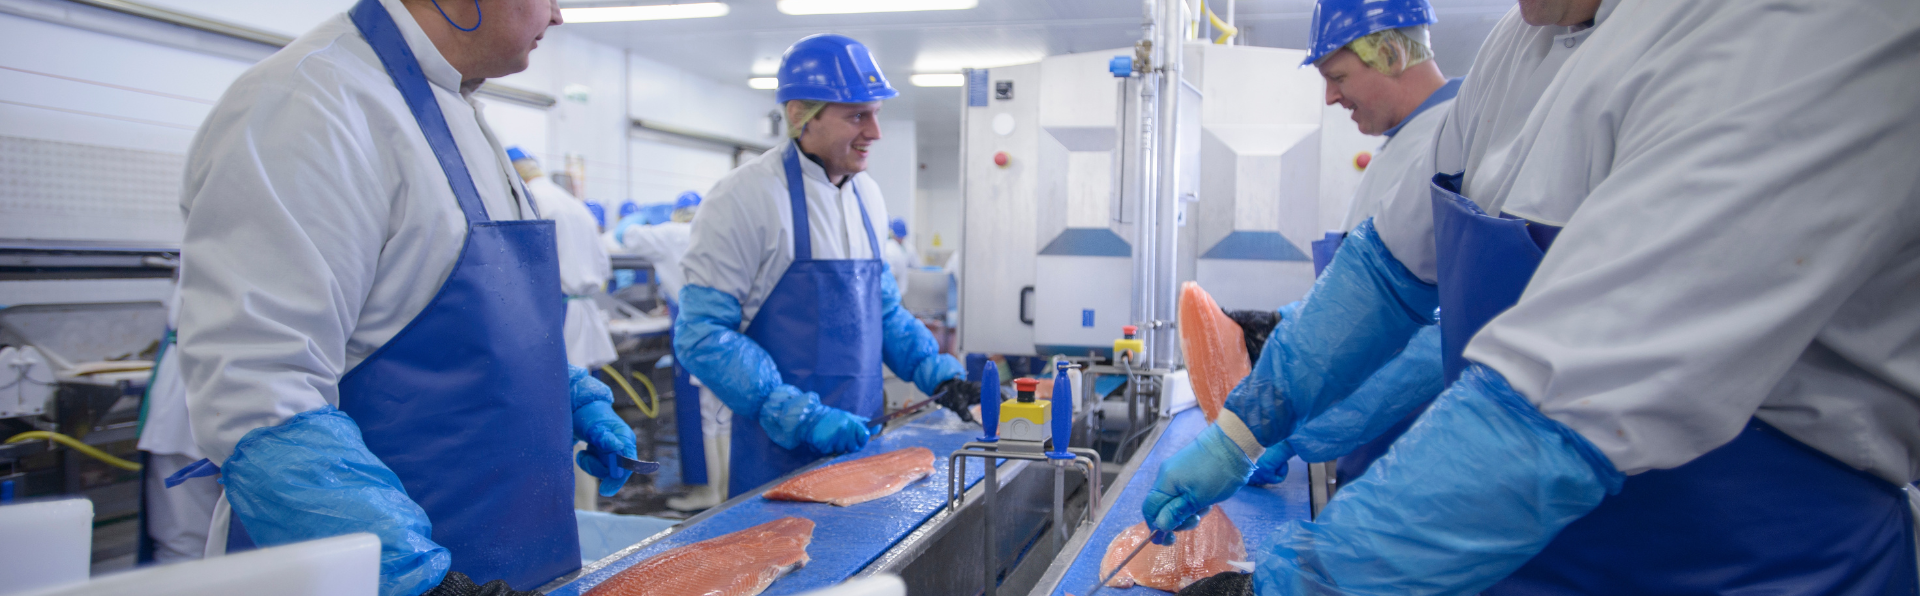 People working in a fish factory.